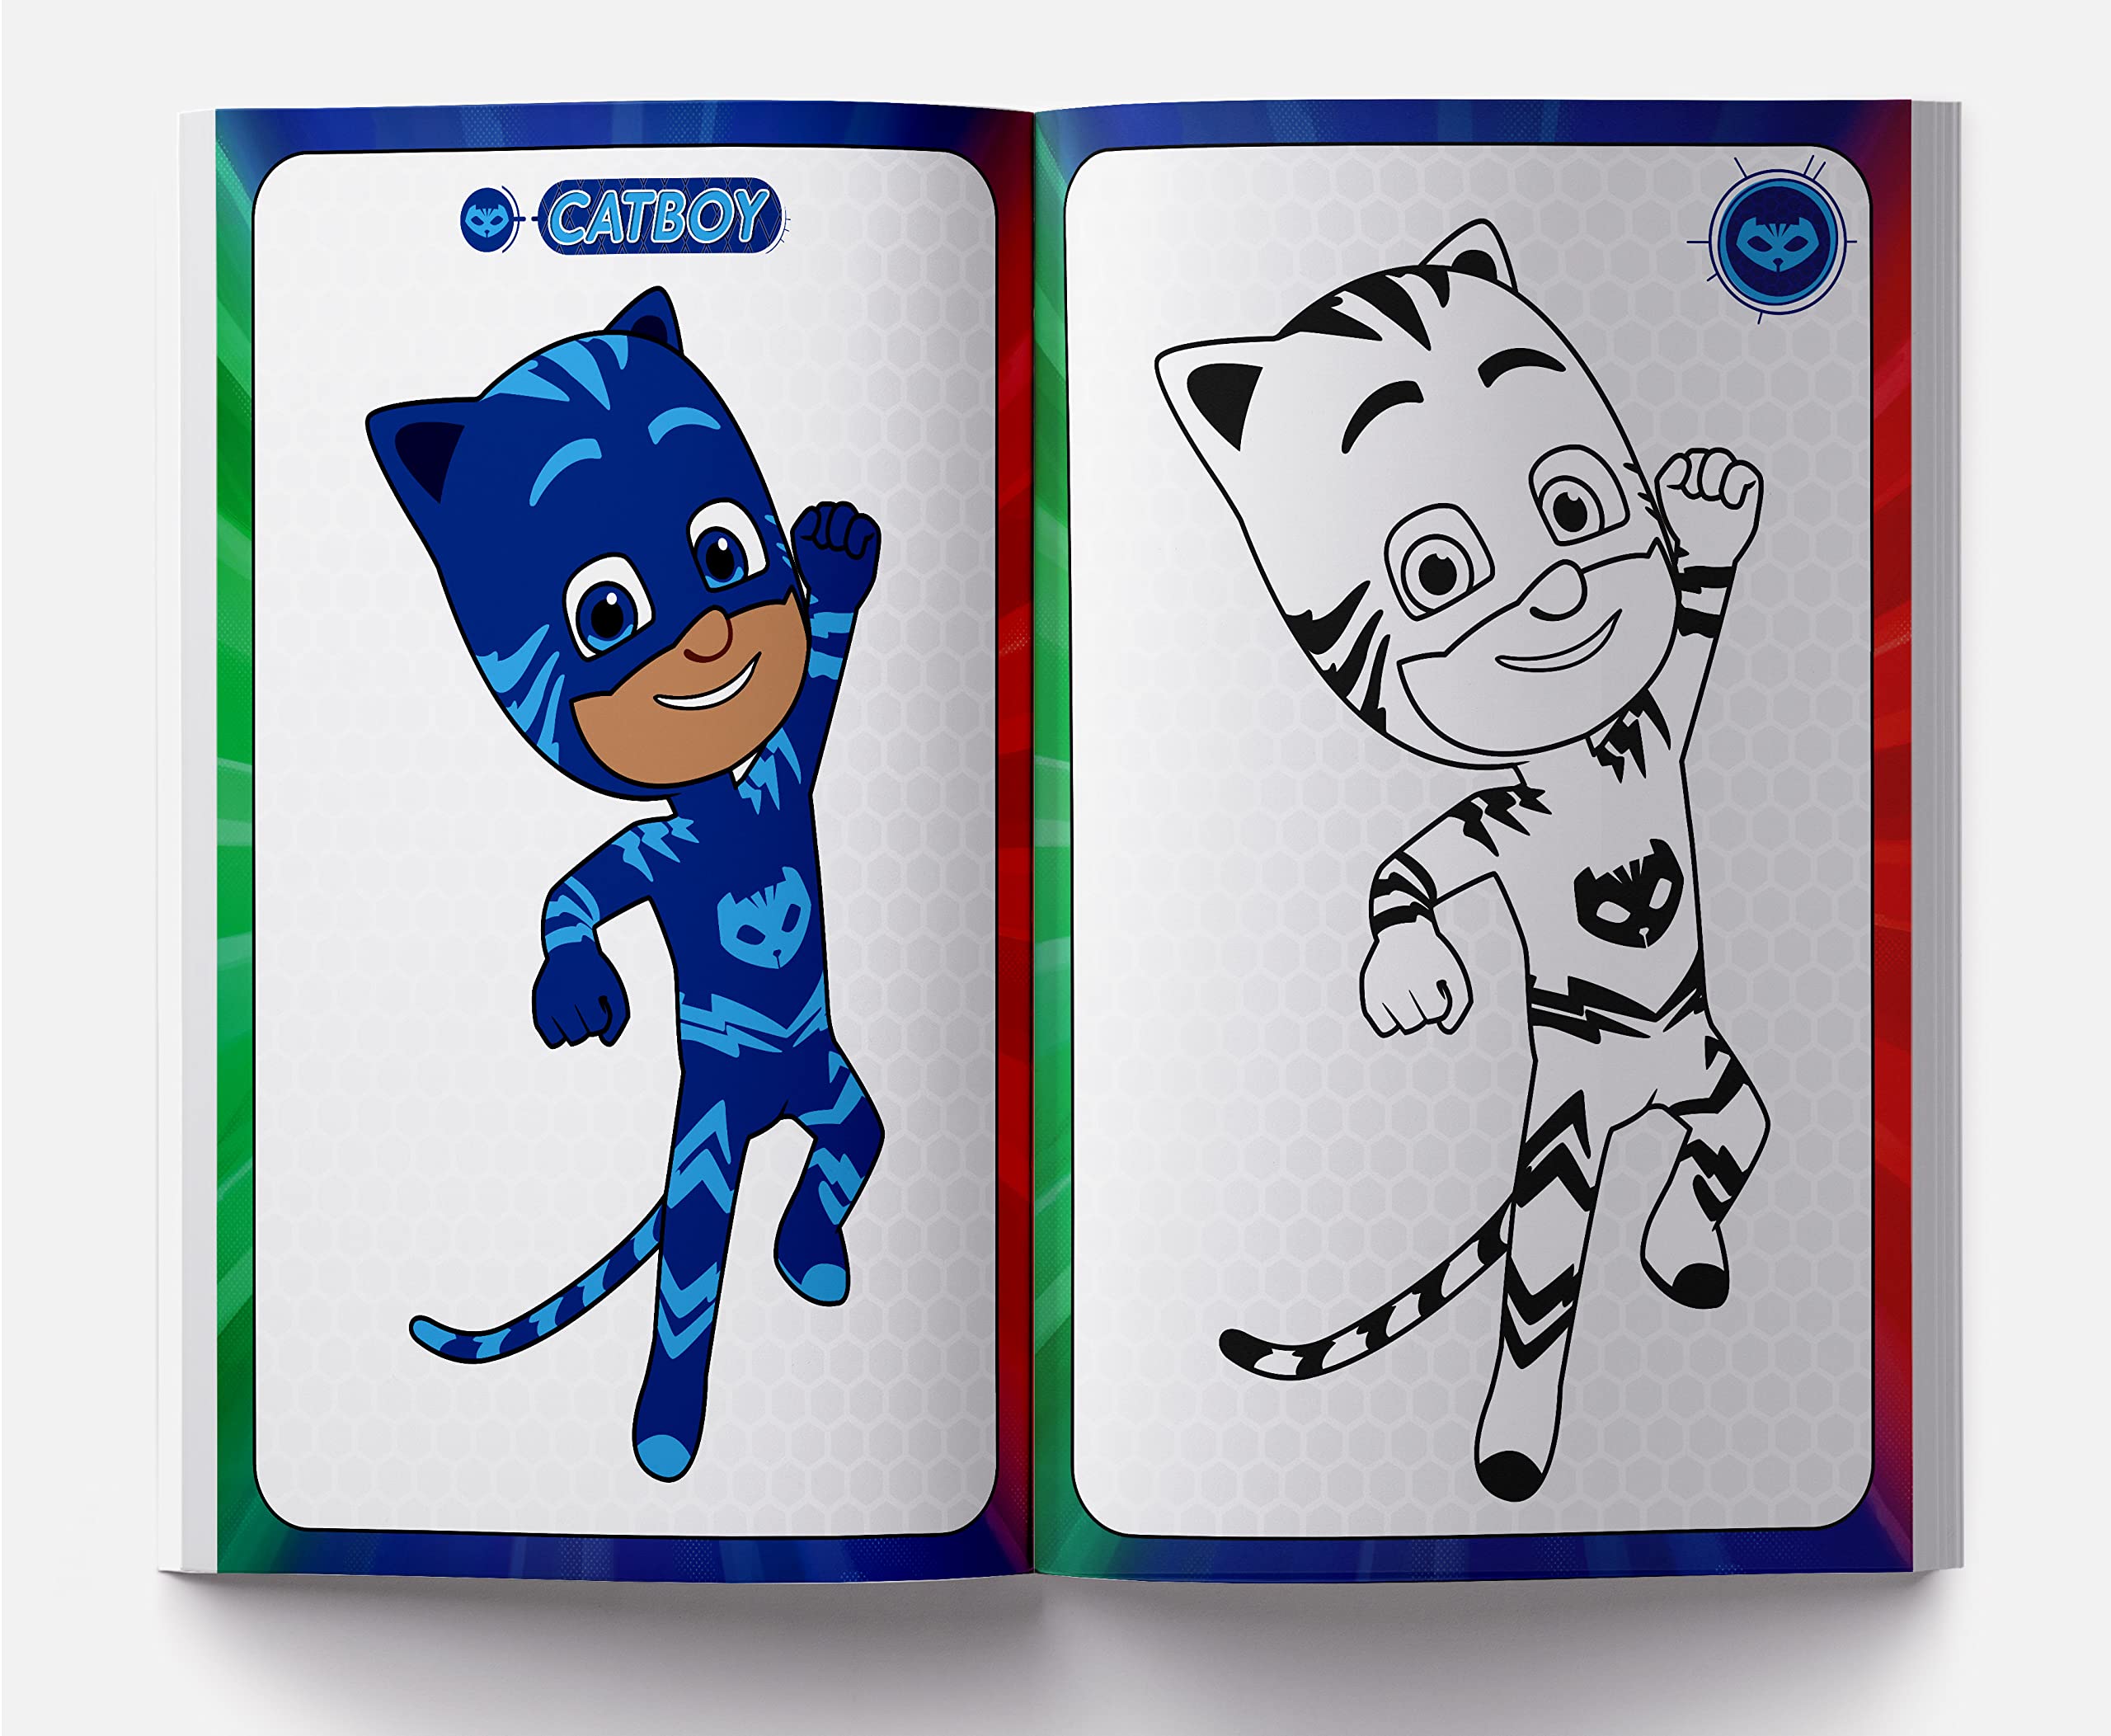 Its Time to be a Hero: PJ Masks - Giant Coloring Book For Childre